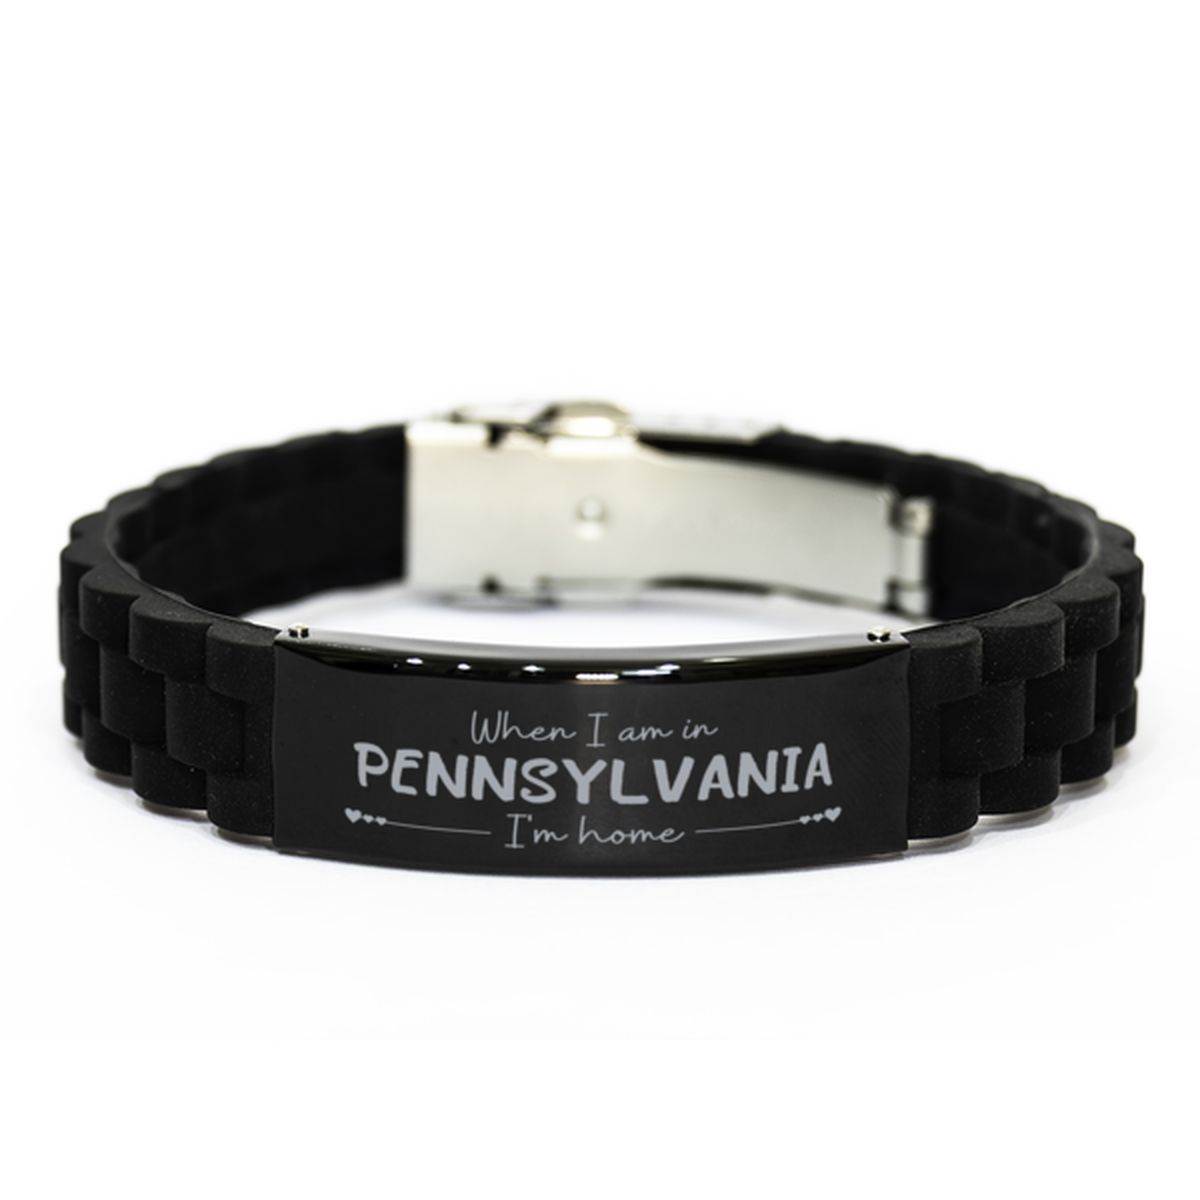 When I am in Pennsylvania I'm home Black Glidelock Clasp Bracelet, Cheap Gifts For Pennsylvania, State Pennsylvania Birthday Gifts for Friends Coworker